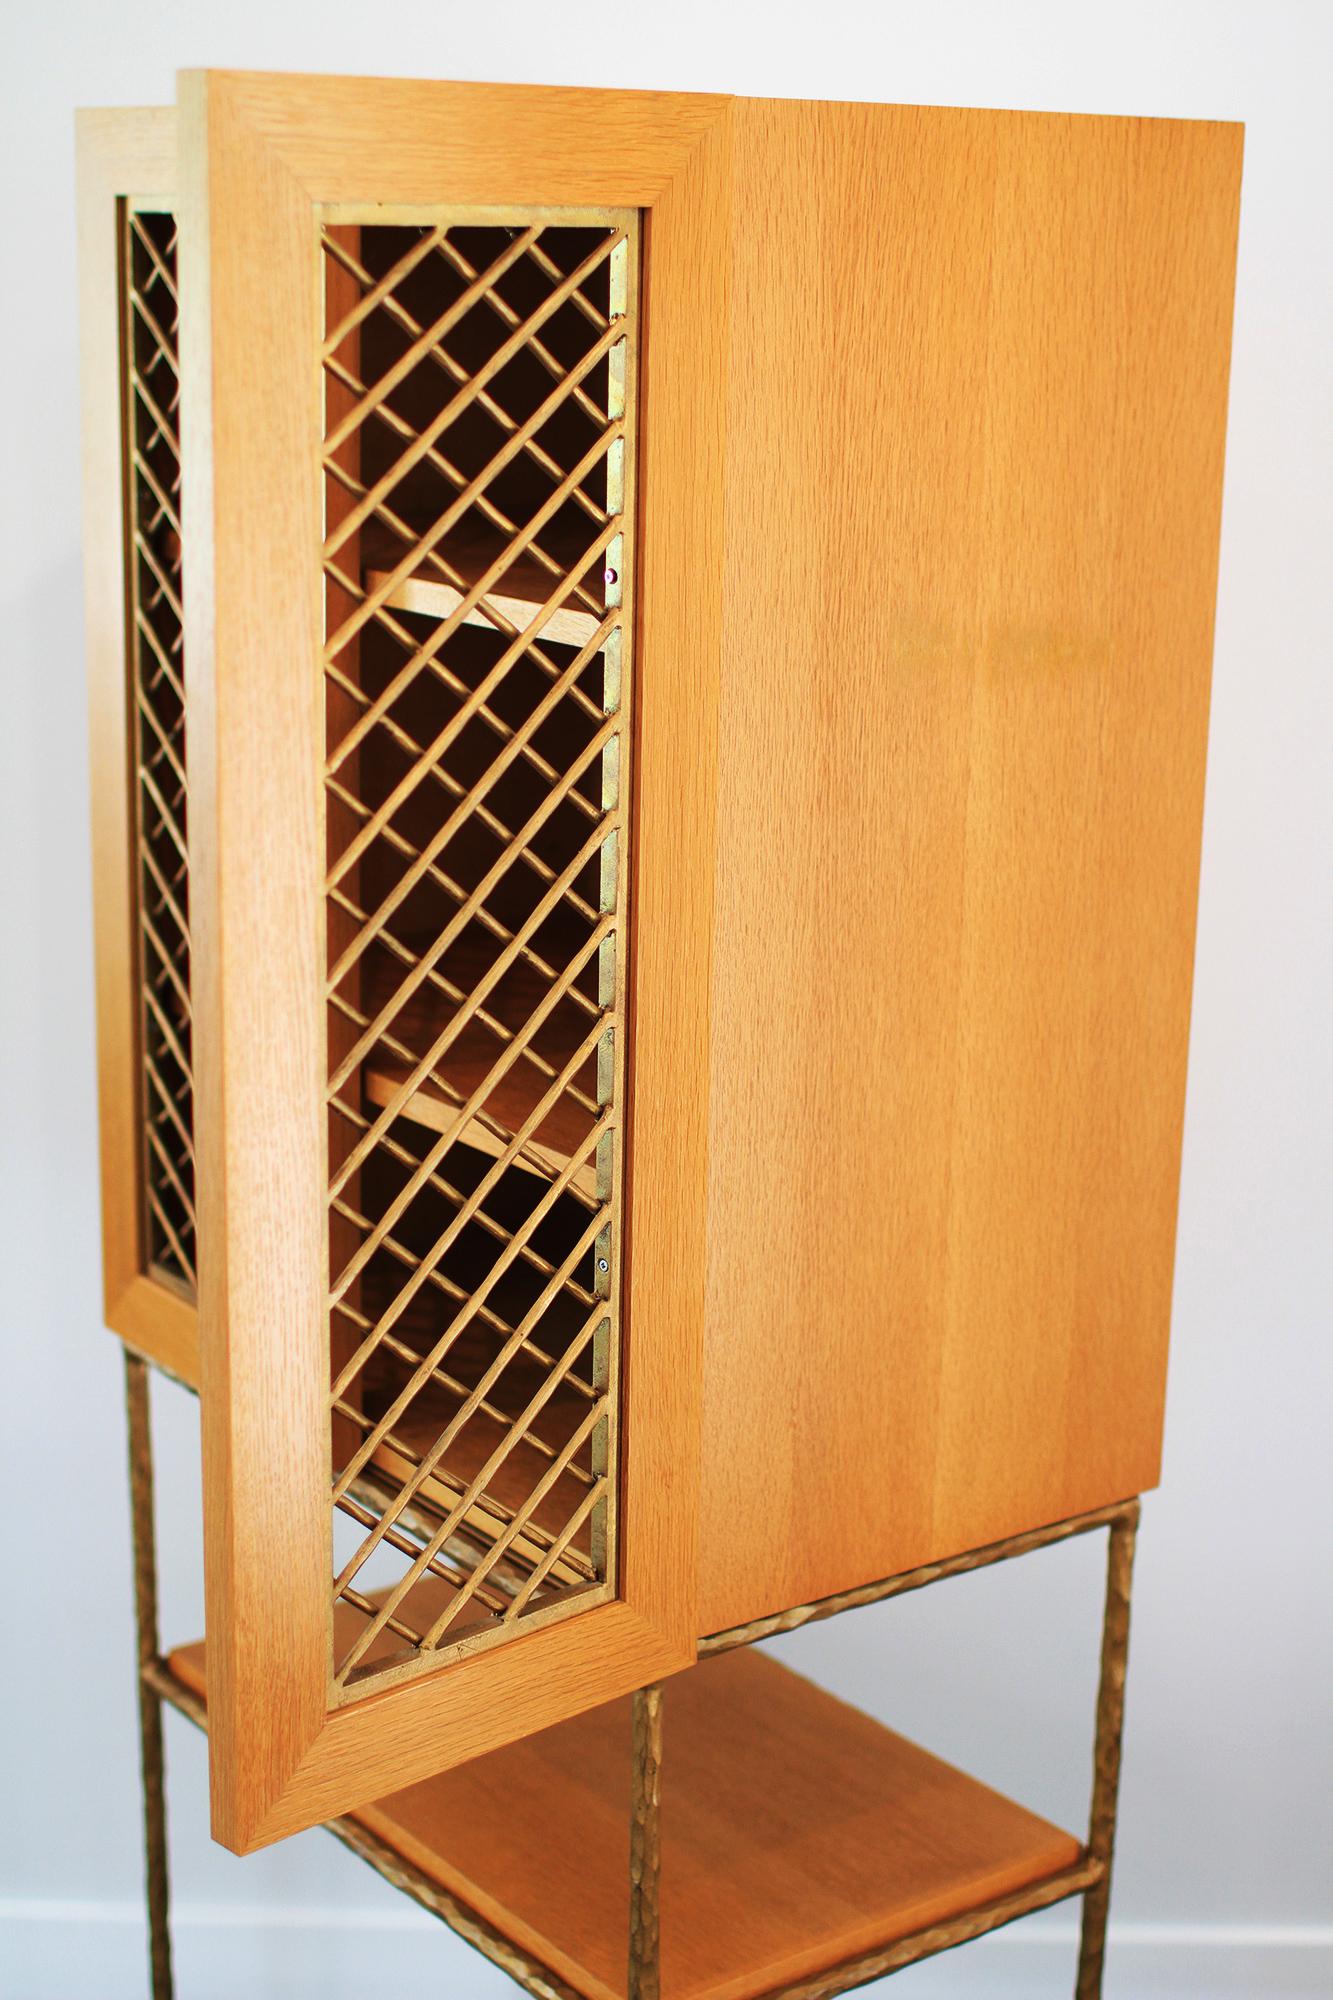 Garouste & Bonetti Cabinet, forged by Diego Giacometti's ironworker For Sale 9